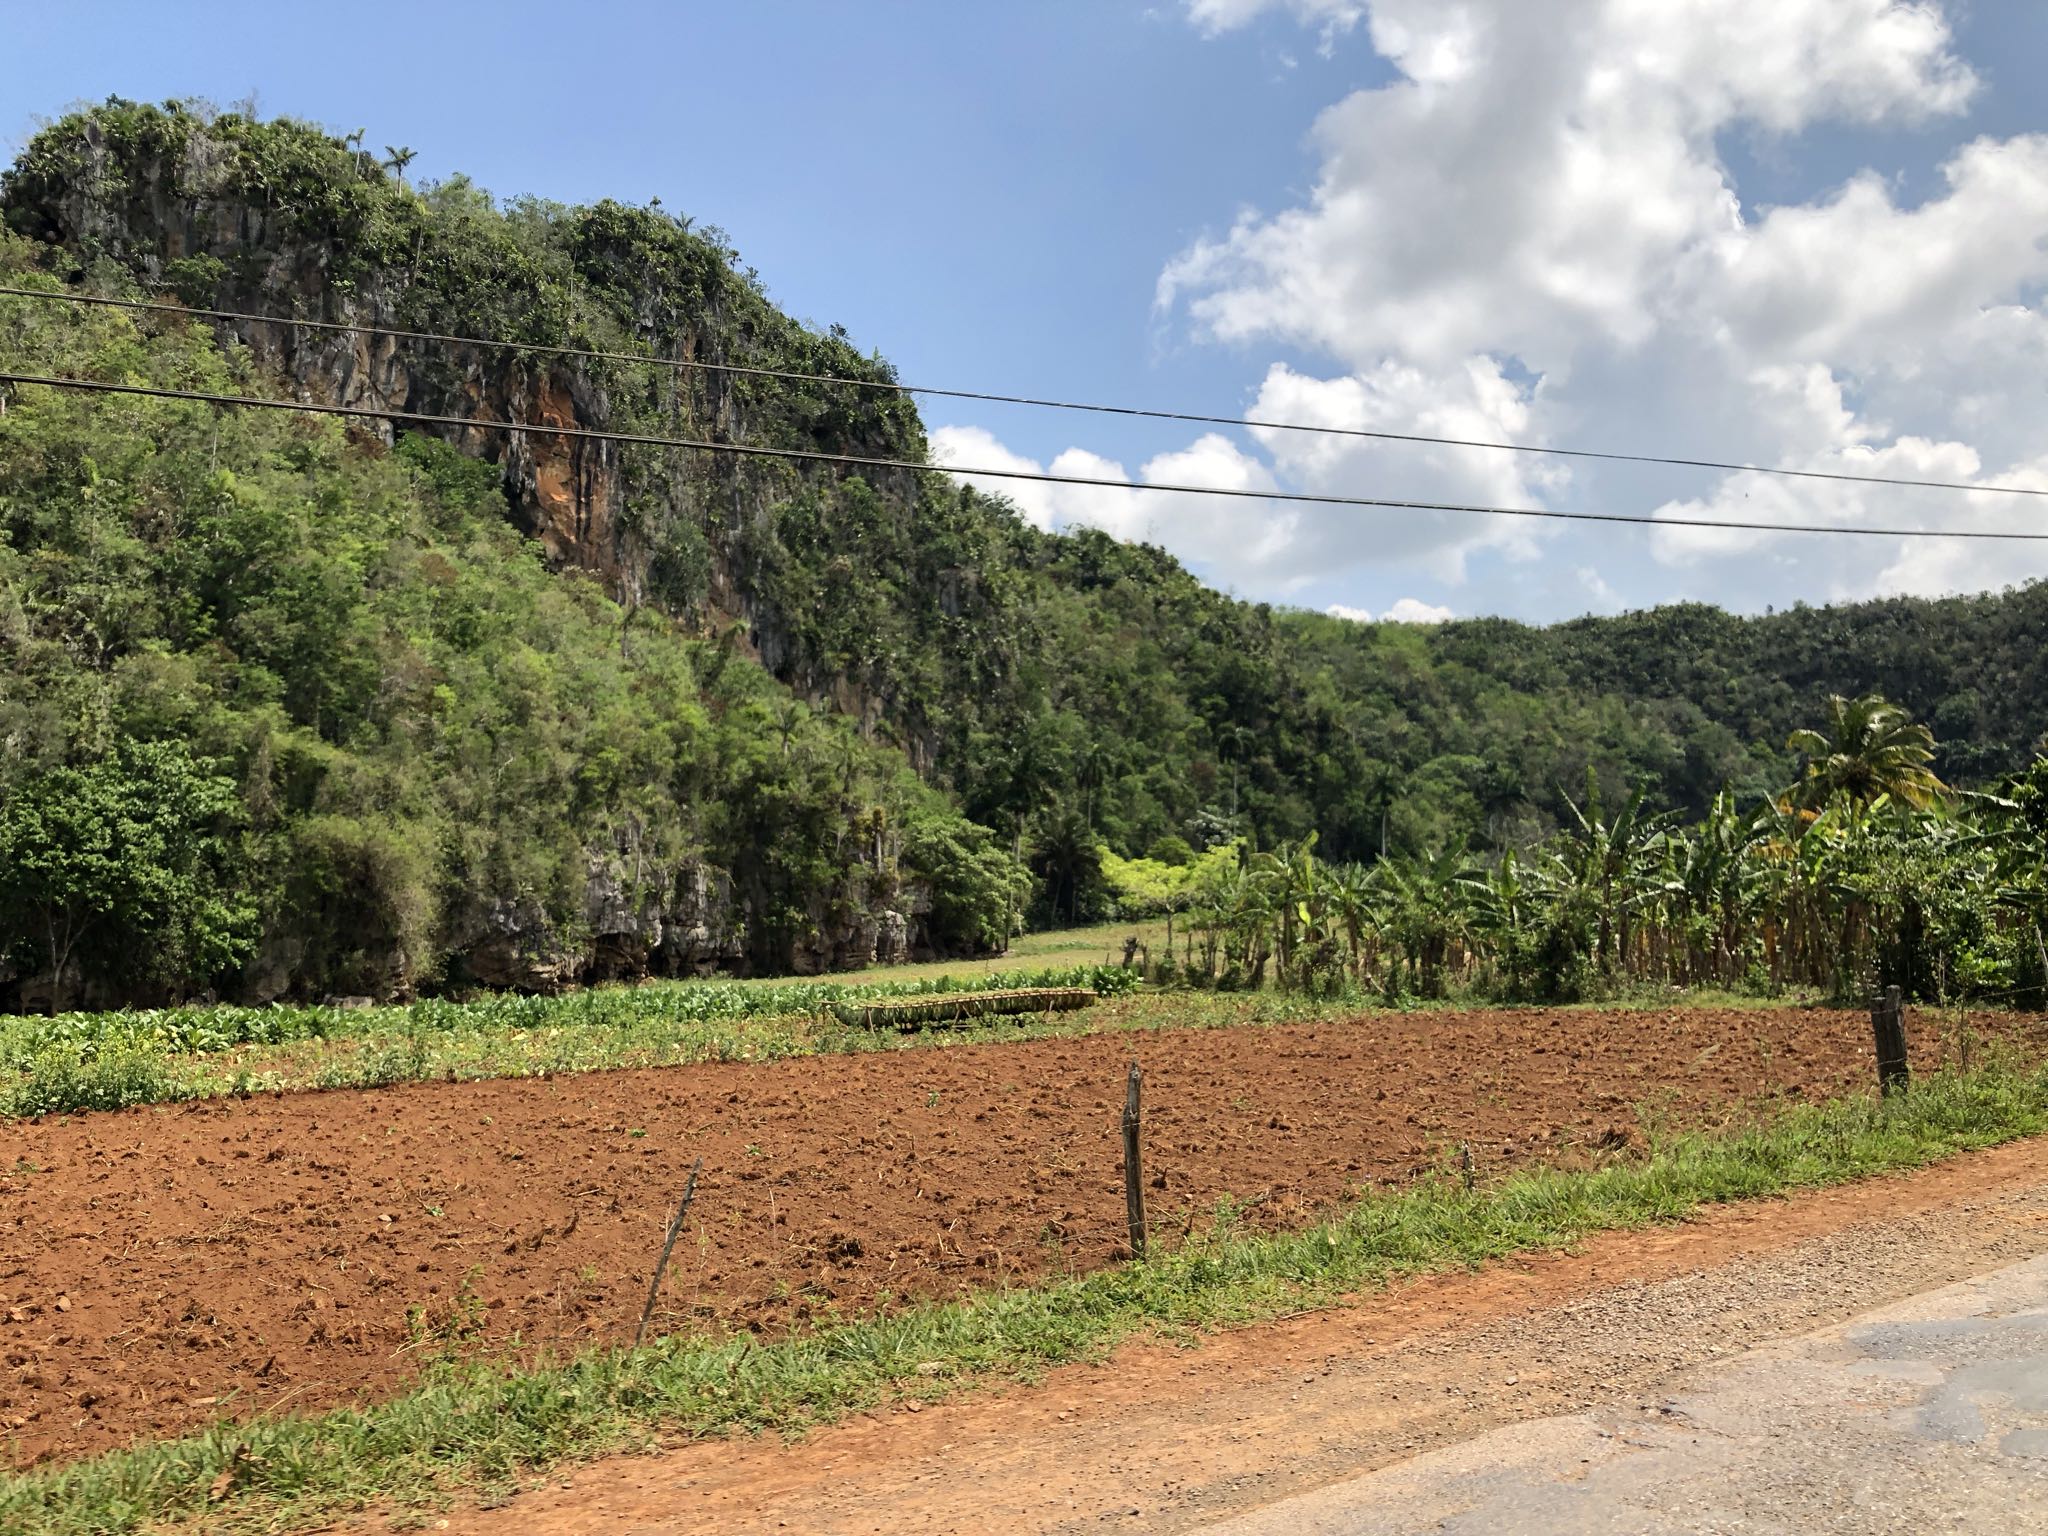 Photo 166 of 221 from the album Highlights Cuba 2019.